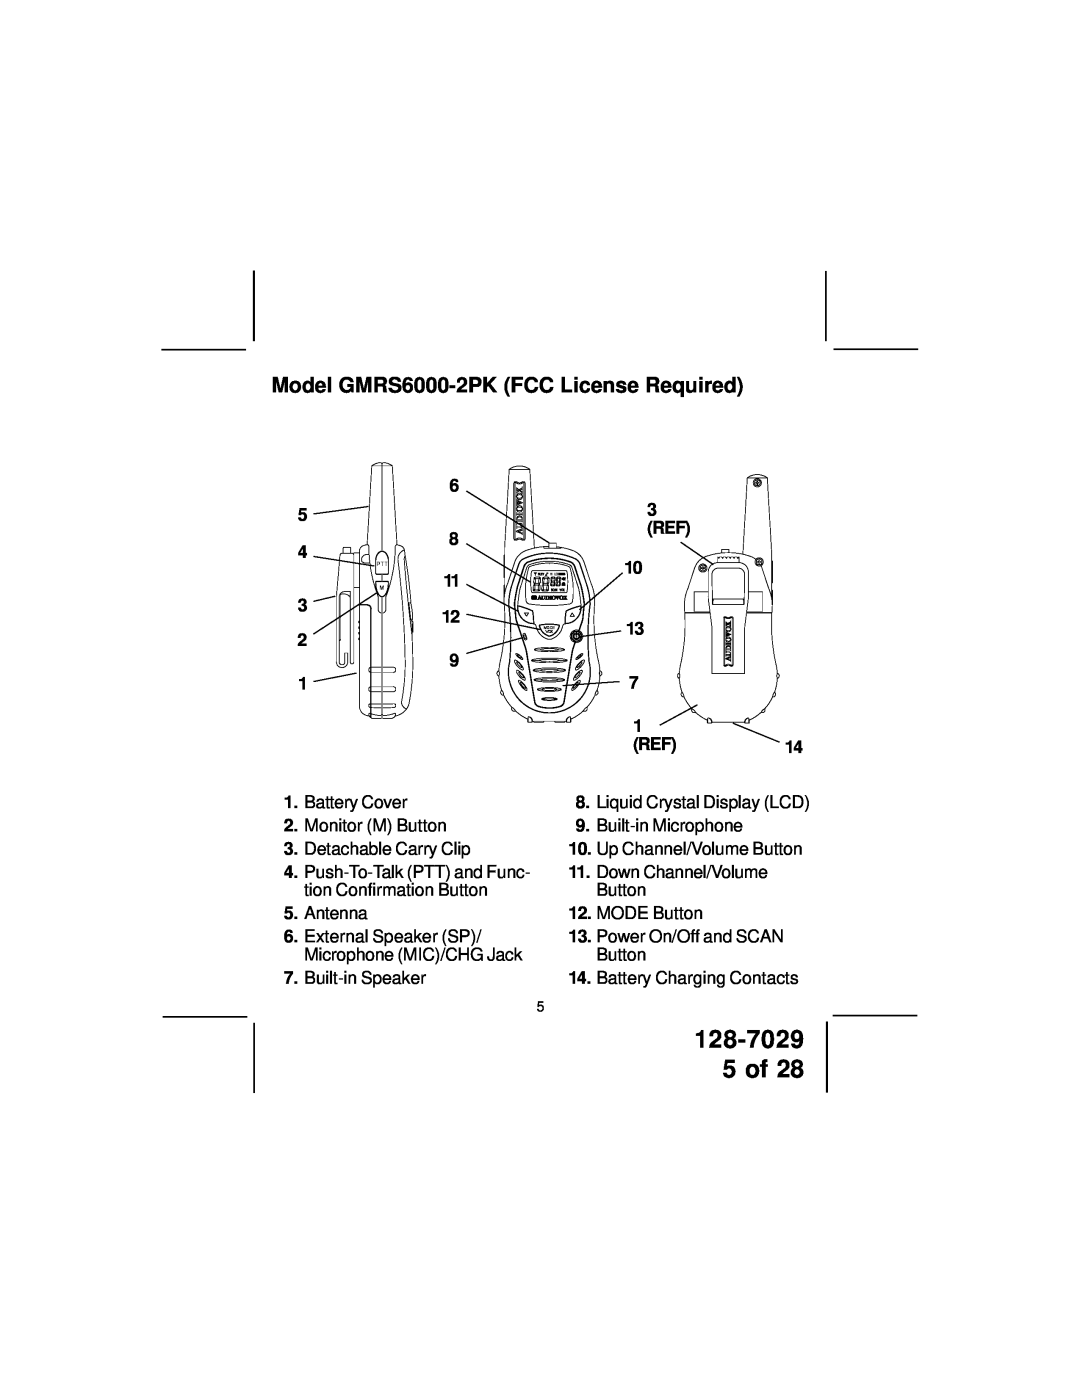 Audiovox owner manual 128-7029 5 of, Model GMRS6000-2PK FCC License Required, REF14 